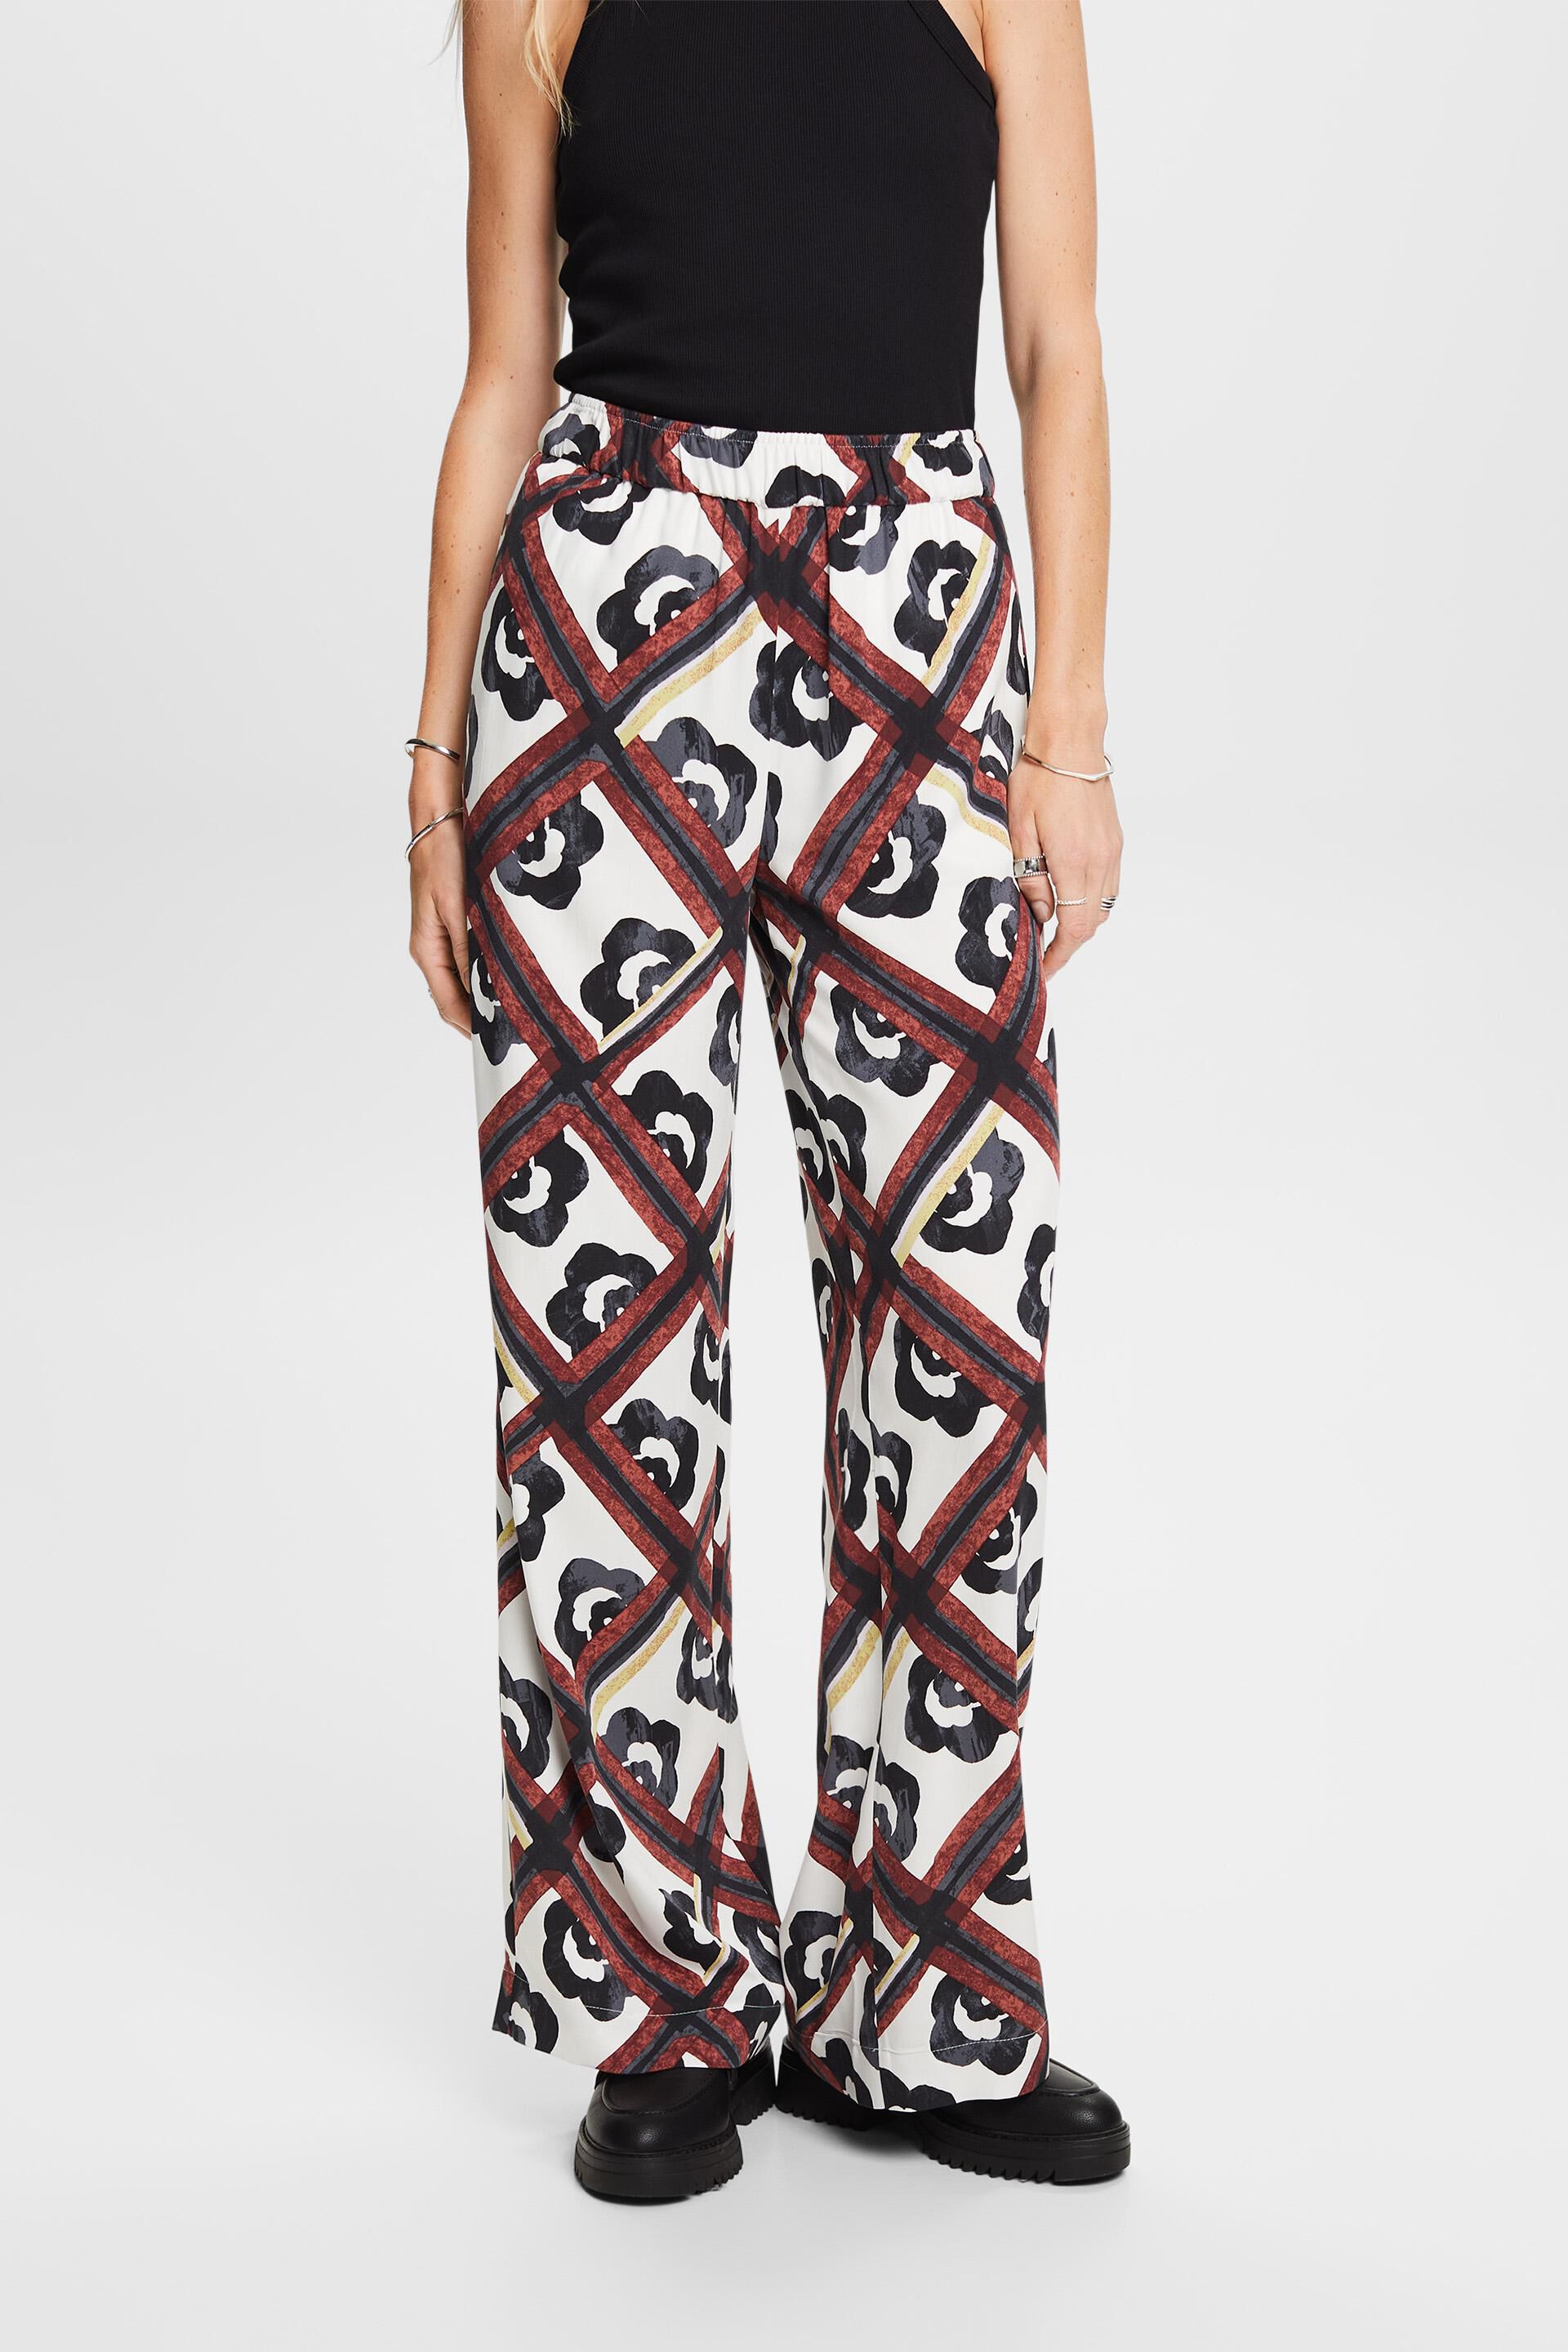 Esprit ECOVERO™ LENZING™ Patterned pull-on trousers,